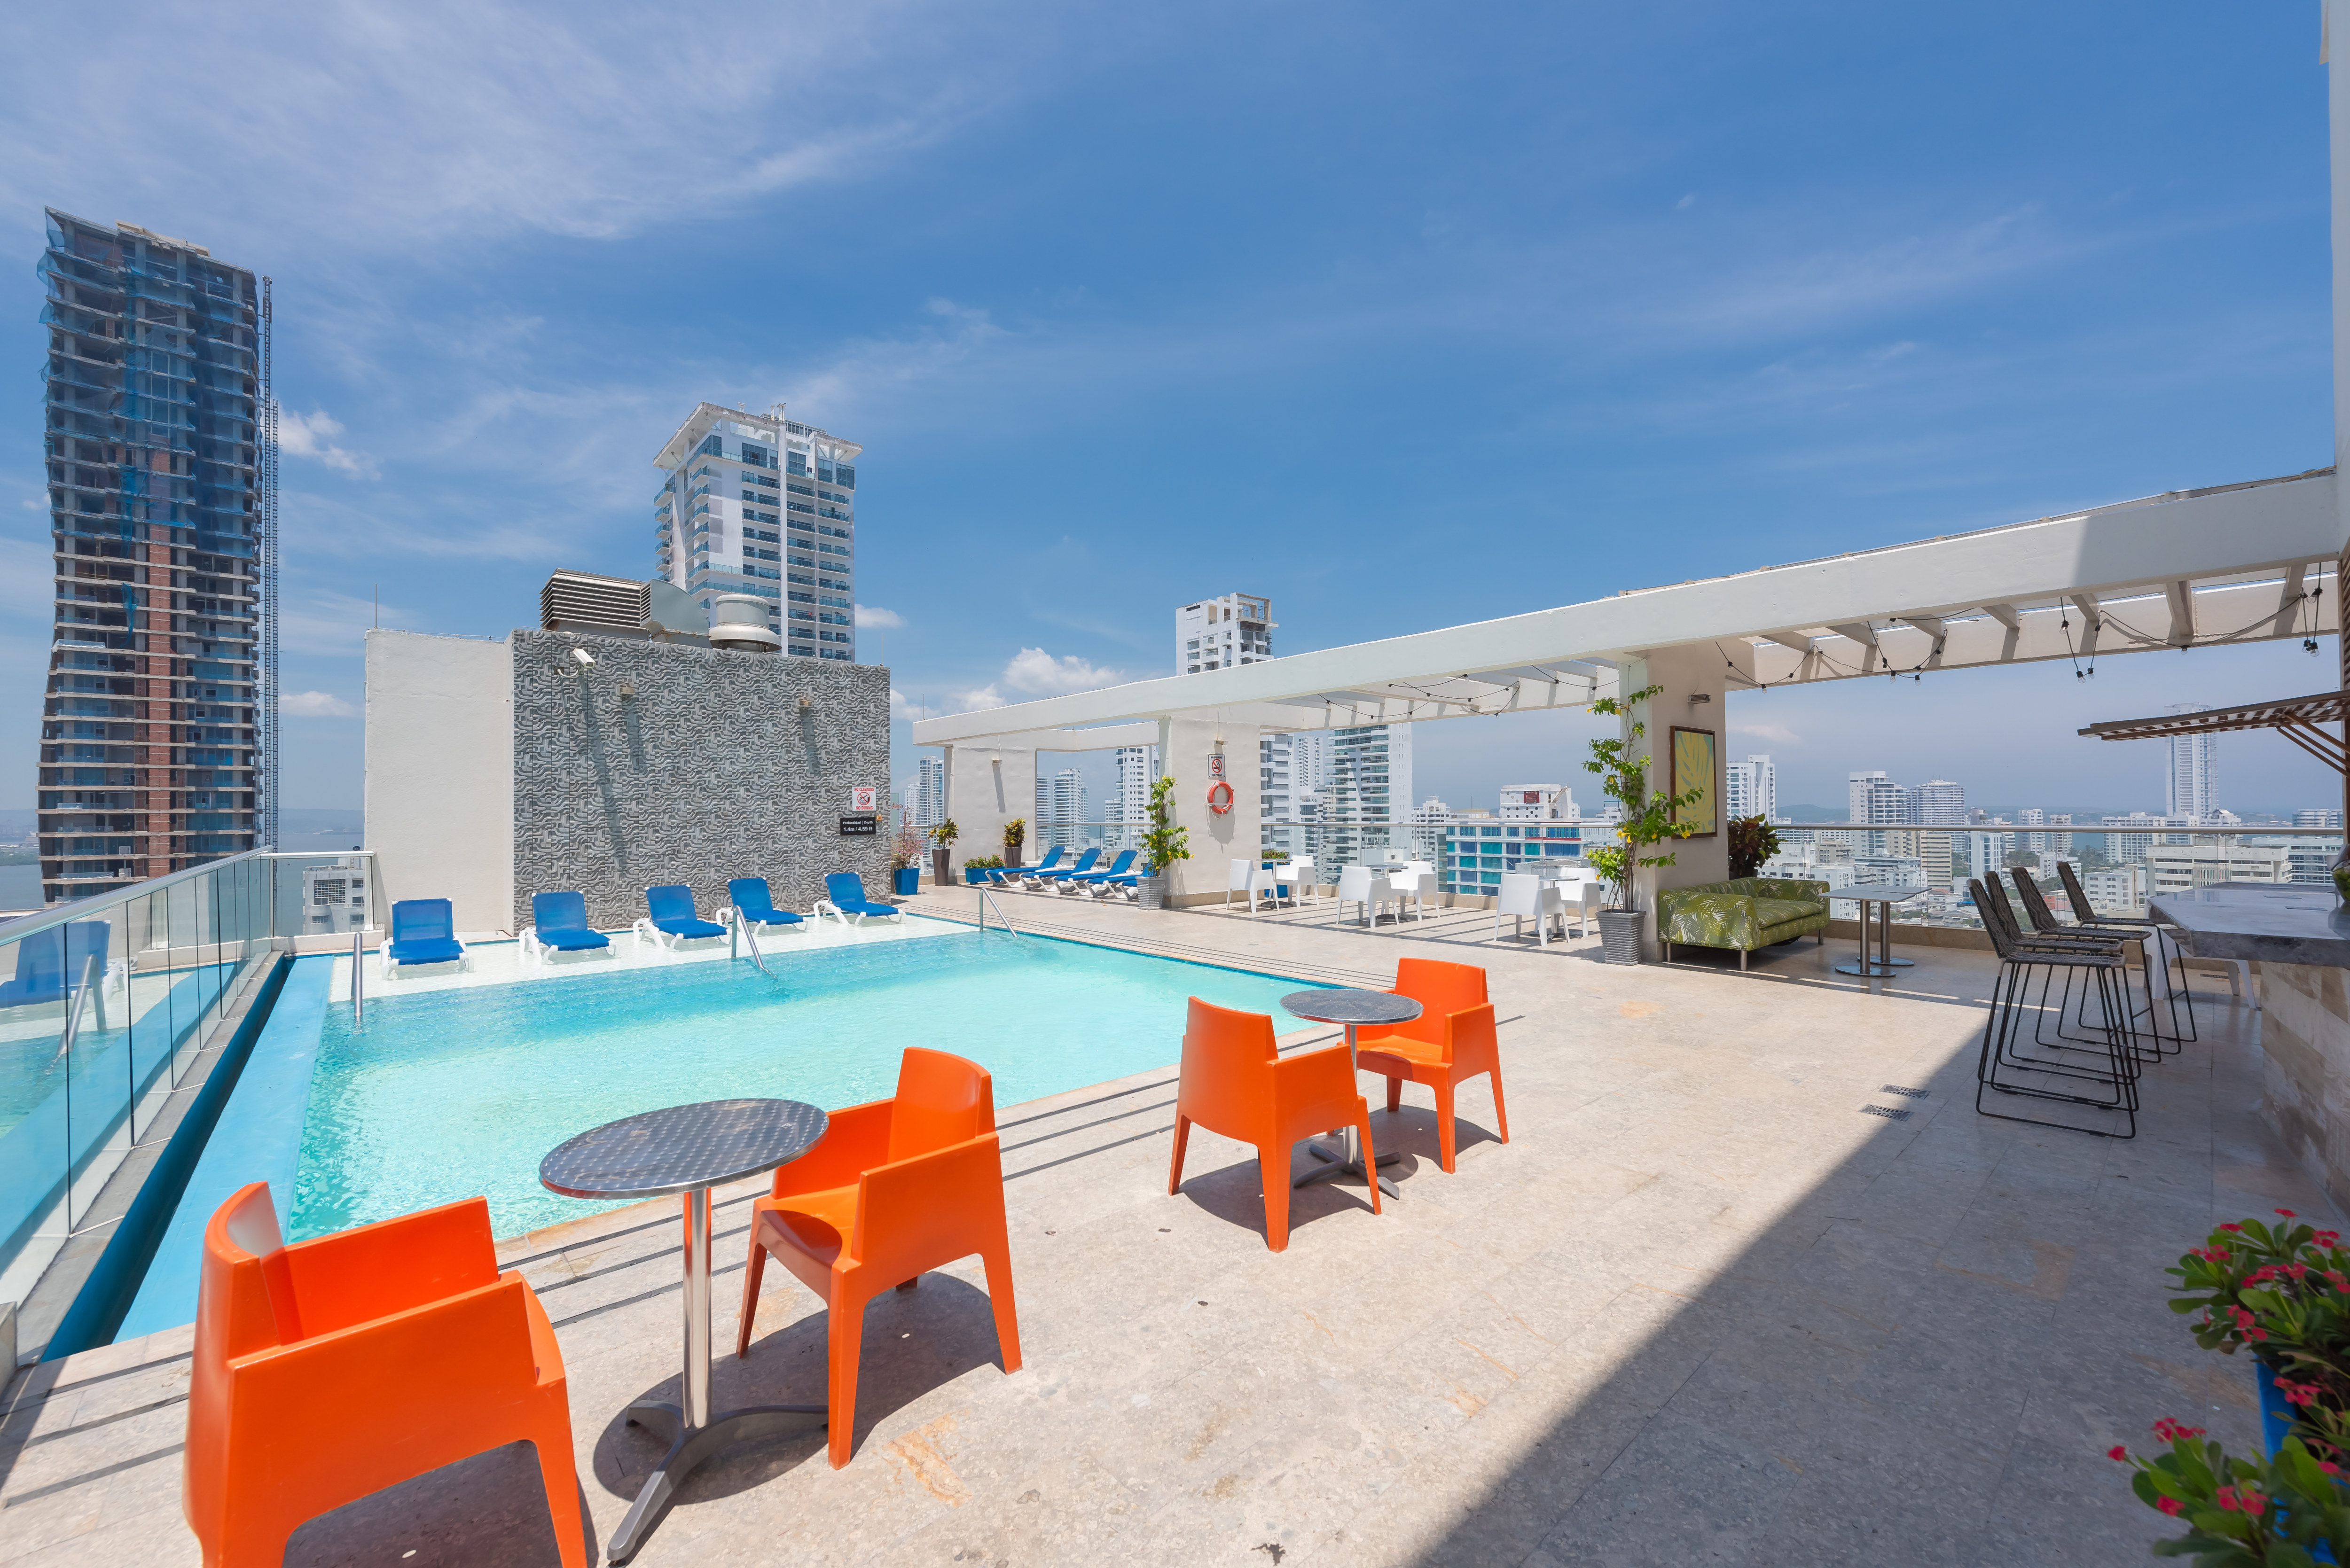 Seats by Outdoor Pool Area with City View